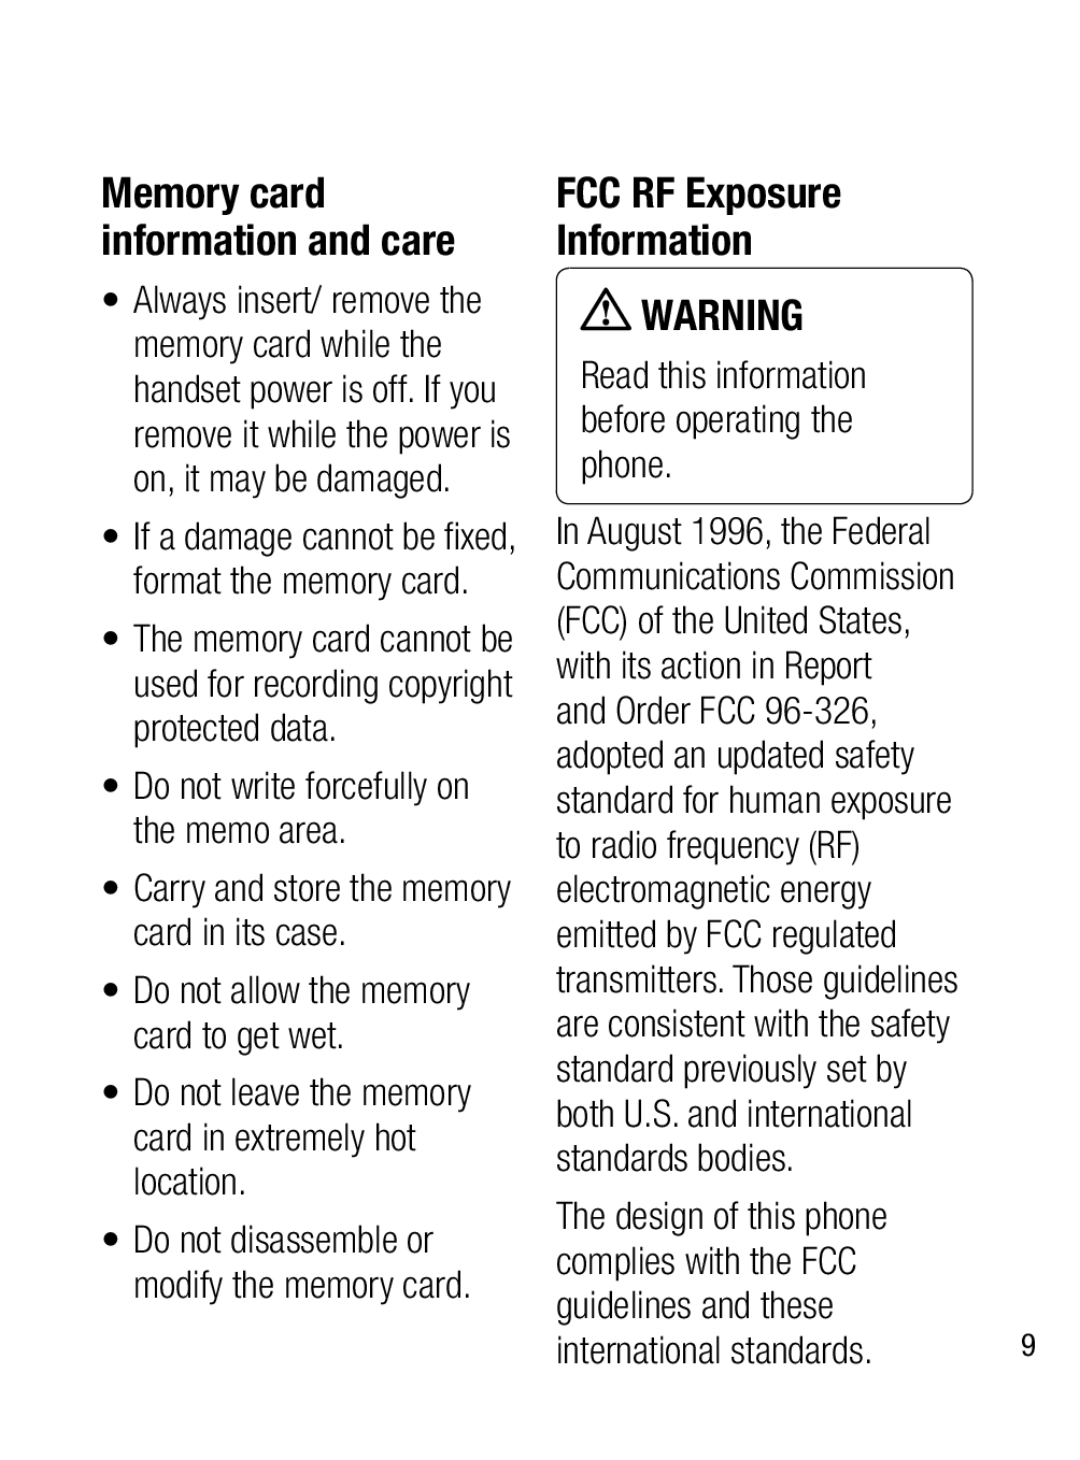 LG Electronics A133CH manual FCC RF Exposure Information, Memory card information and care, The design of this phone 